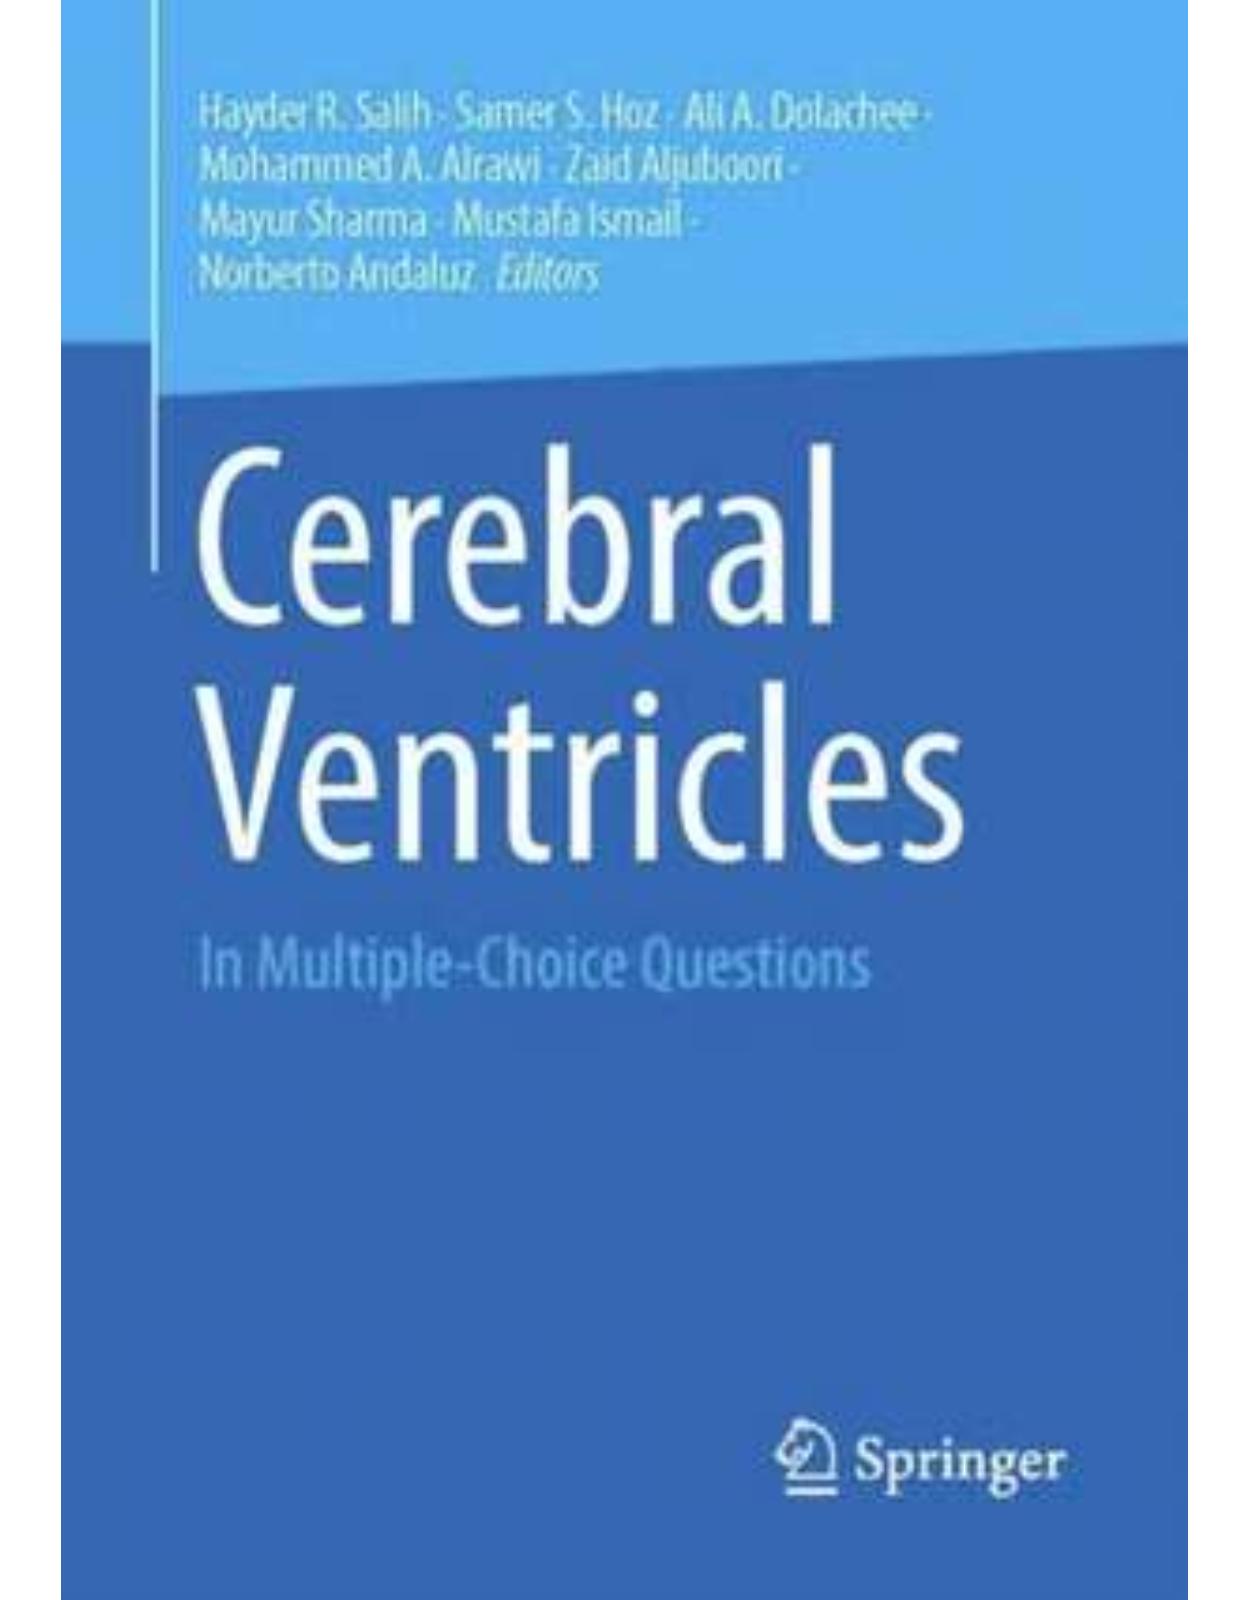 Cerebral Ventricles: In Multiple-Choice Questions 